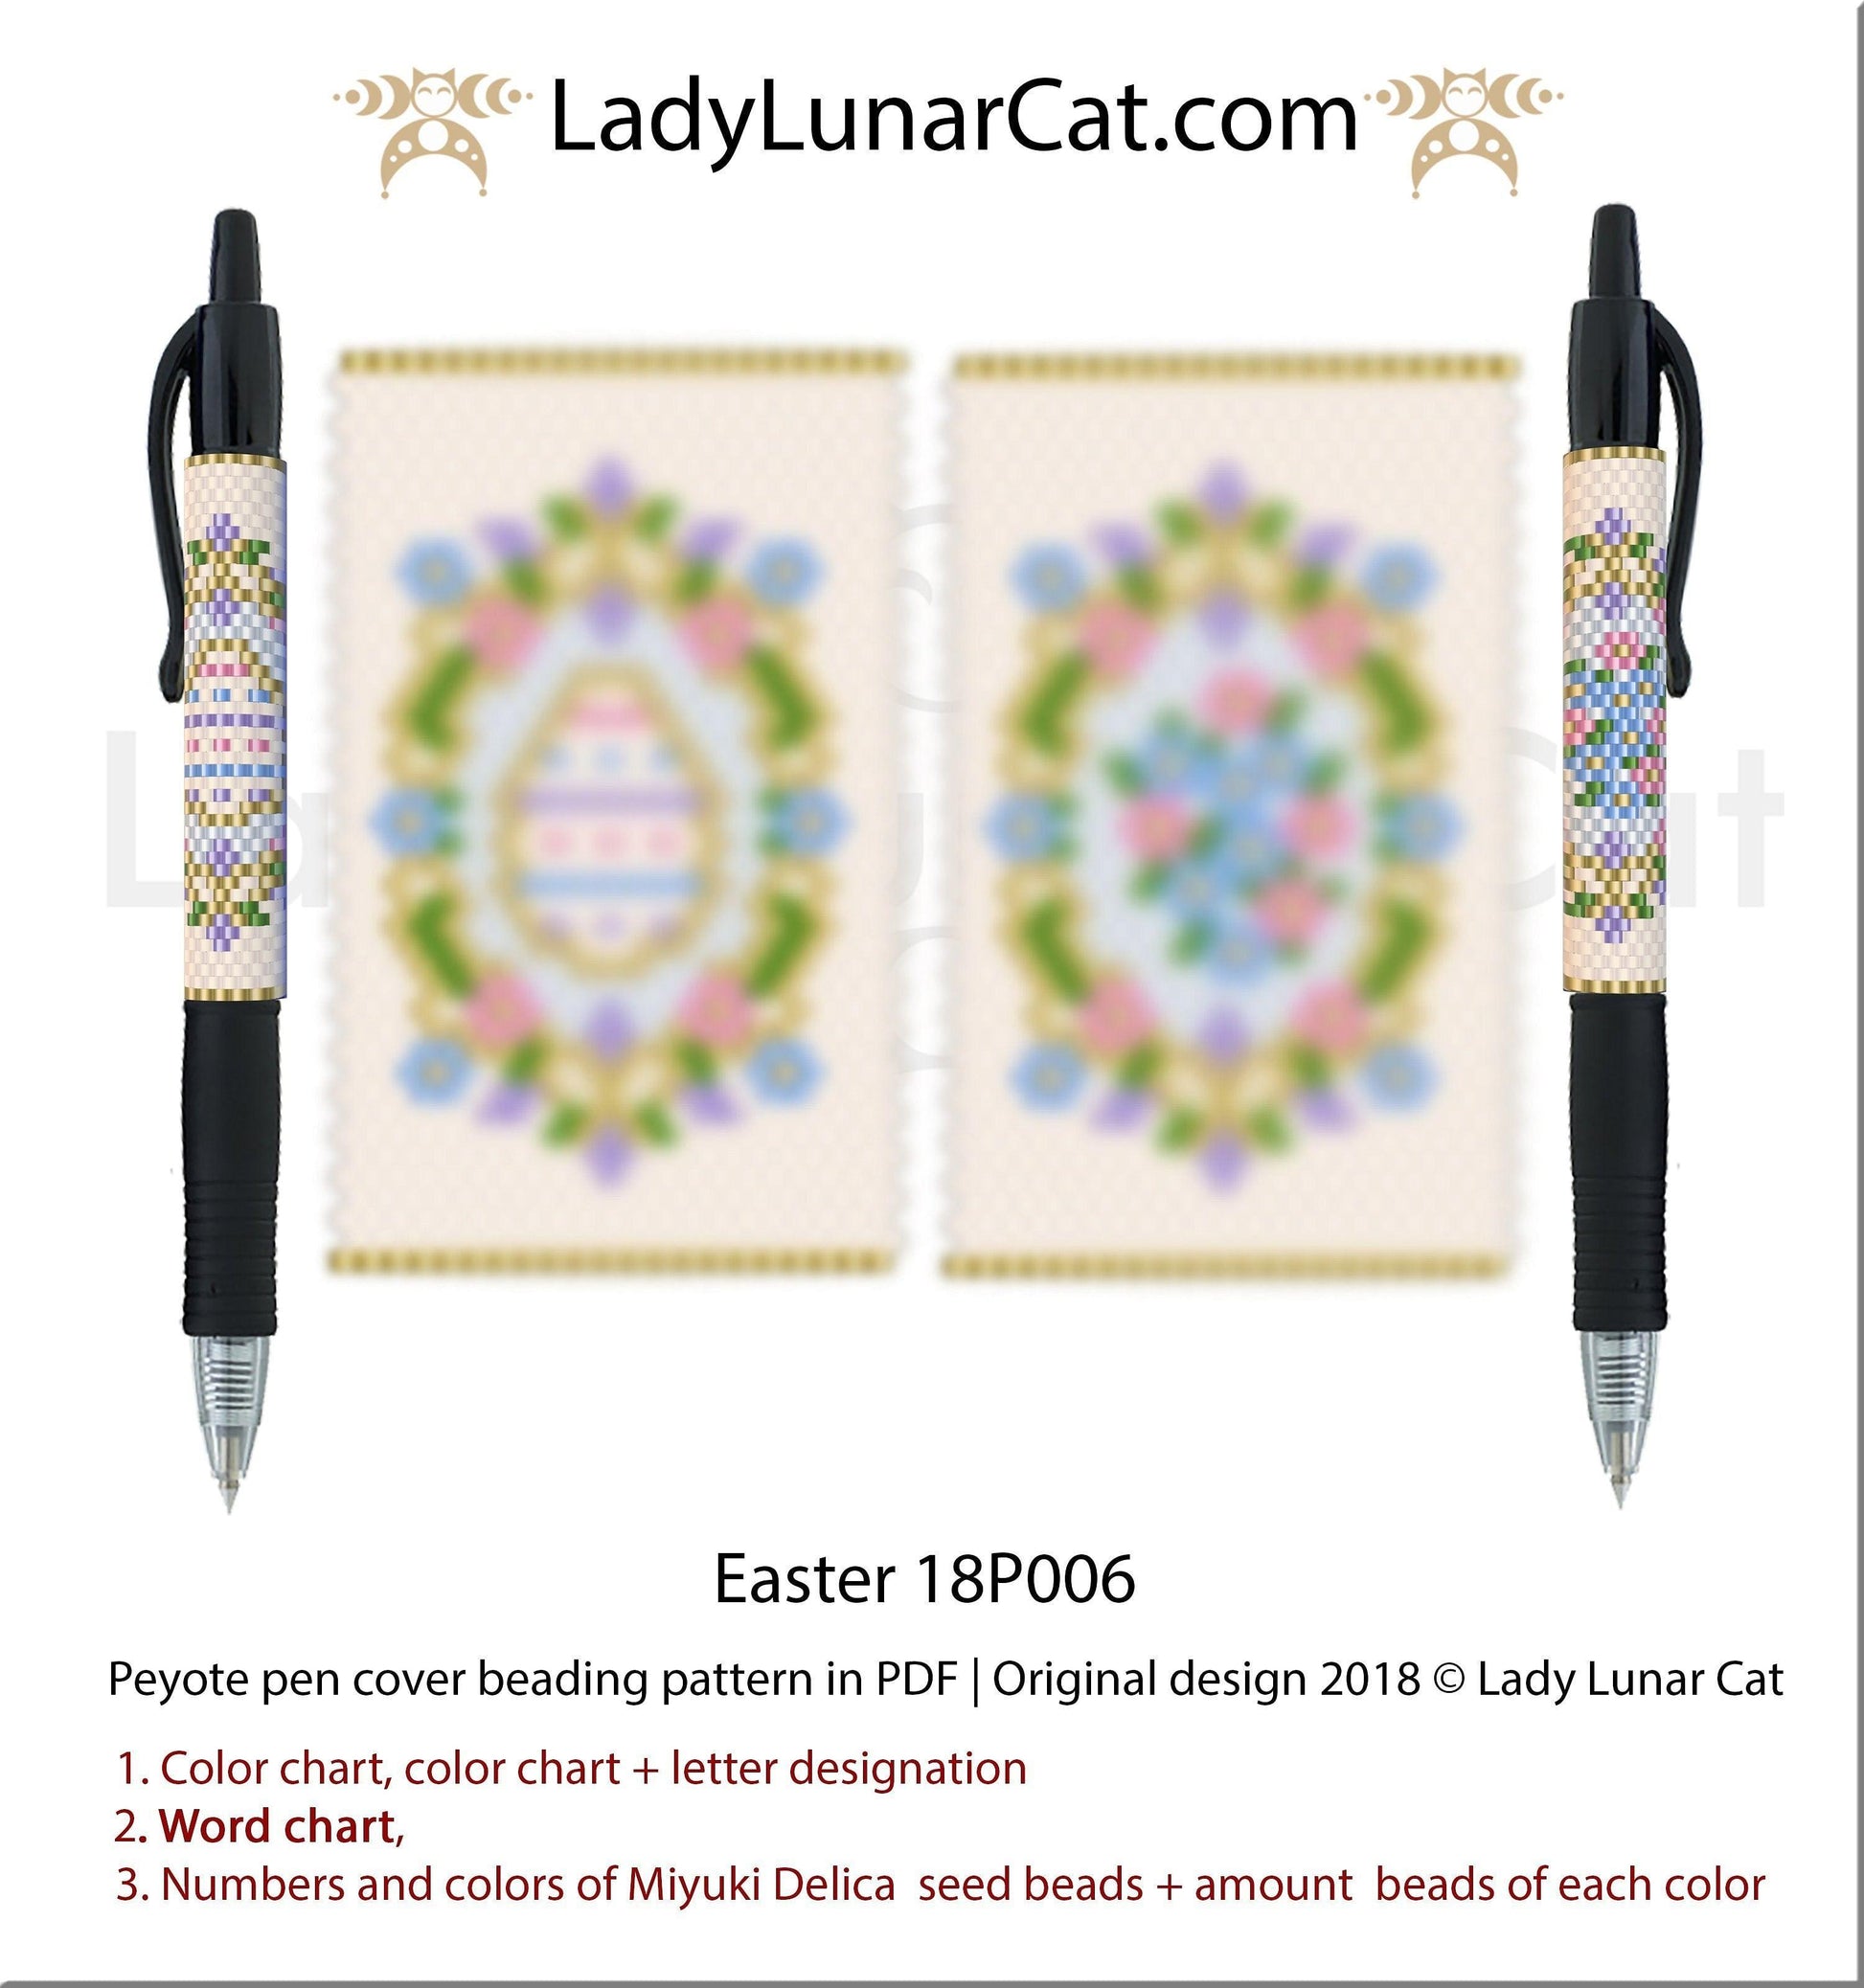 Peyote pen cover pattern for beading | Beaded pen wrap and rings tutorial Easter 18P006 LadyLunarCat